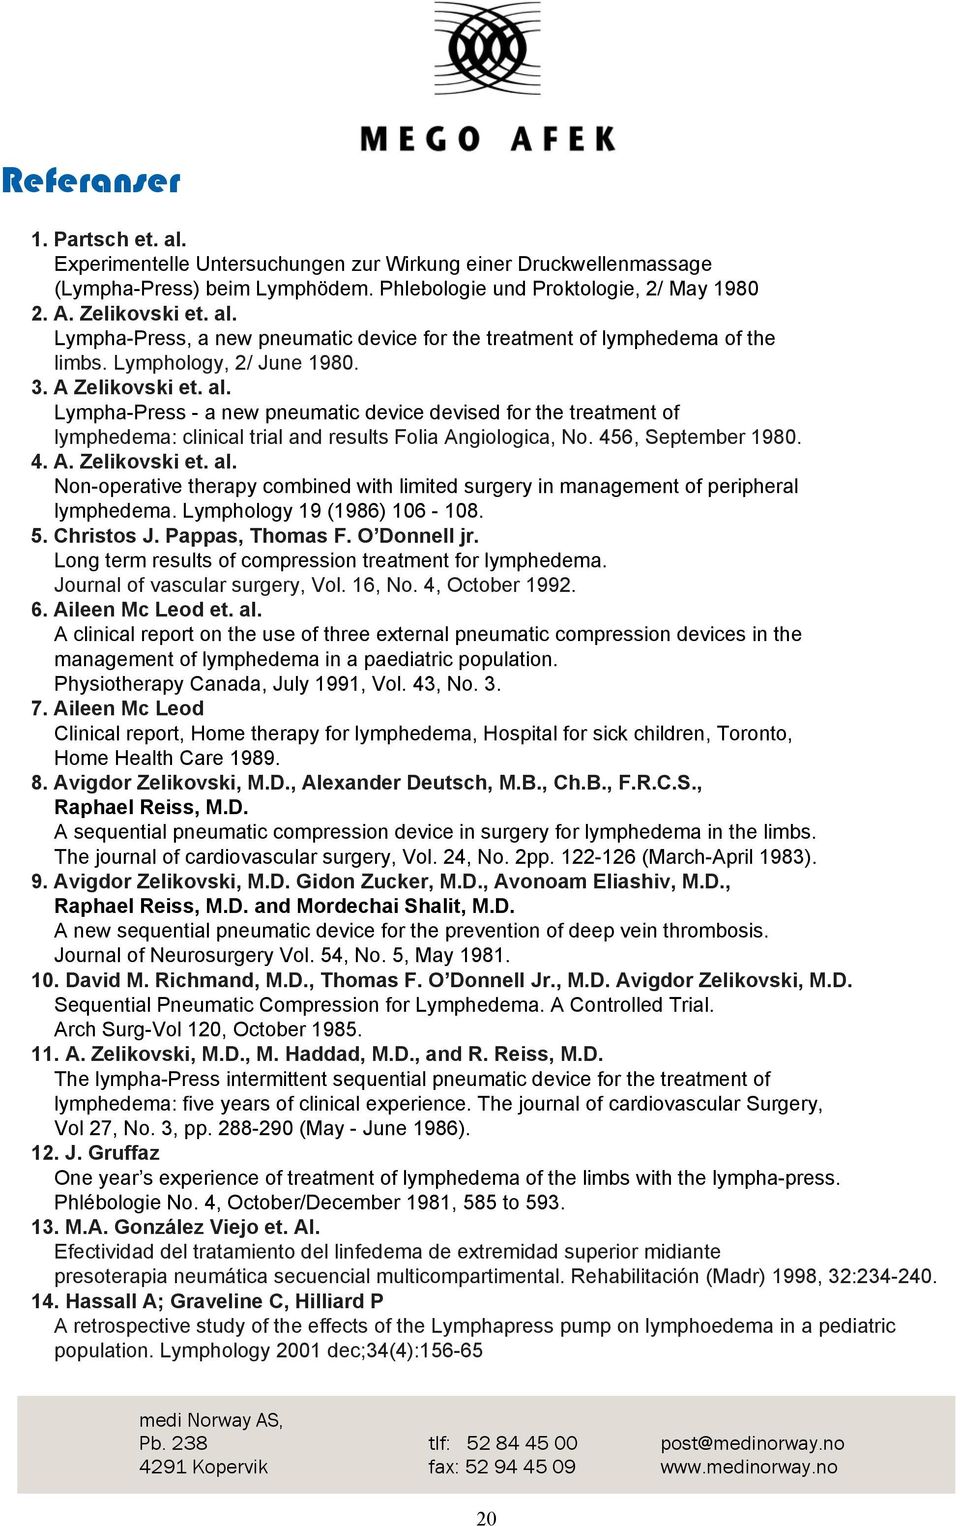 4. A. Zelikovski et. al. Non-operative therapy combined with limited surgery in management of peripheral lymphedema. Lymphology 19 (1986) 6-8. 5. Christos J. Pappas, Thomas F. O Donnell jr.